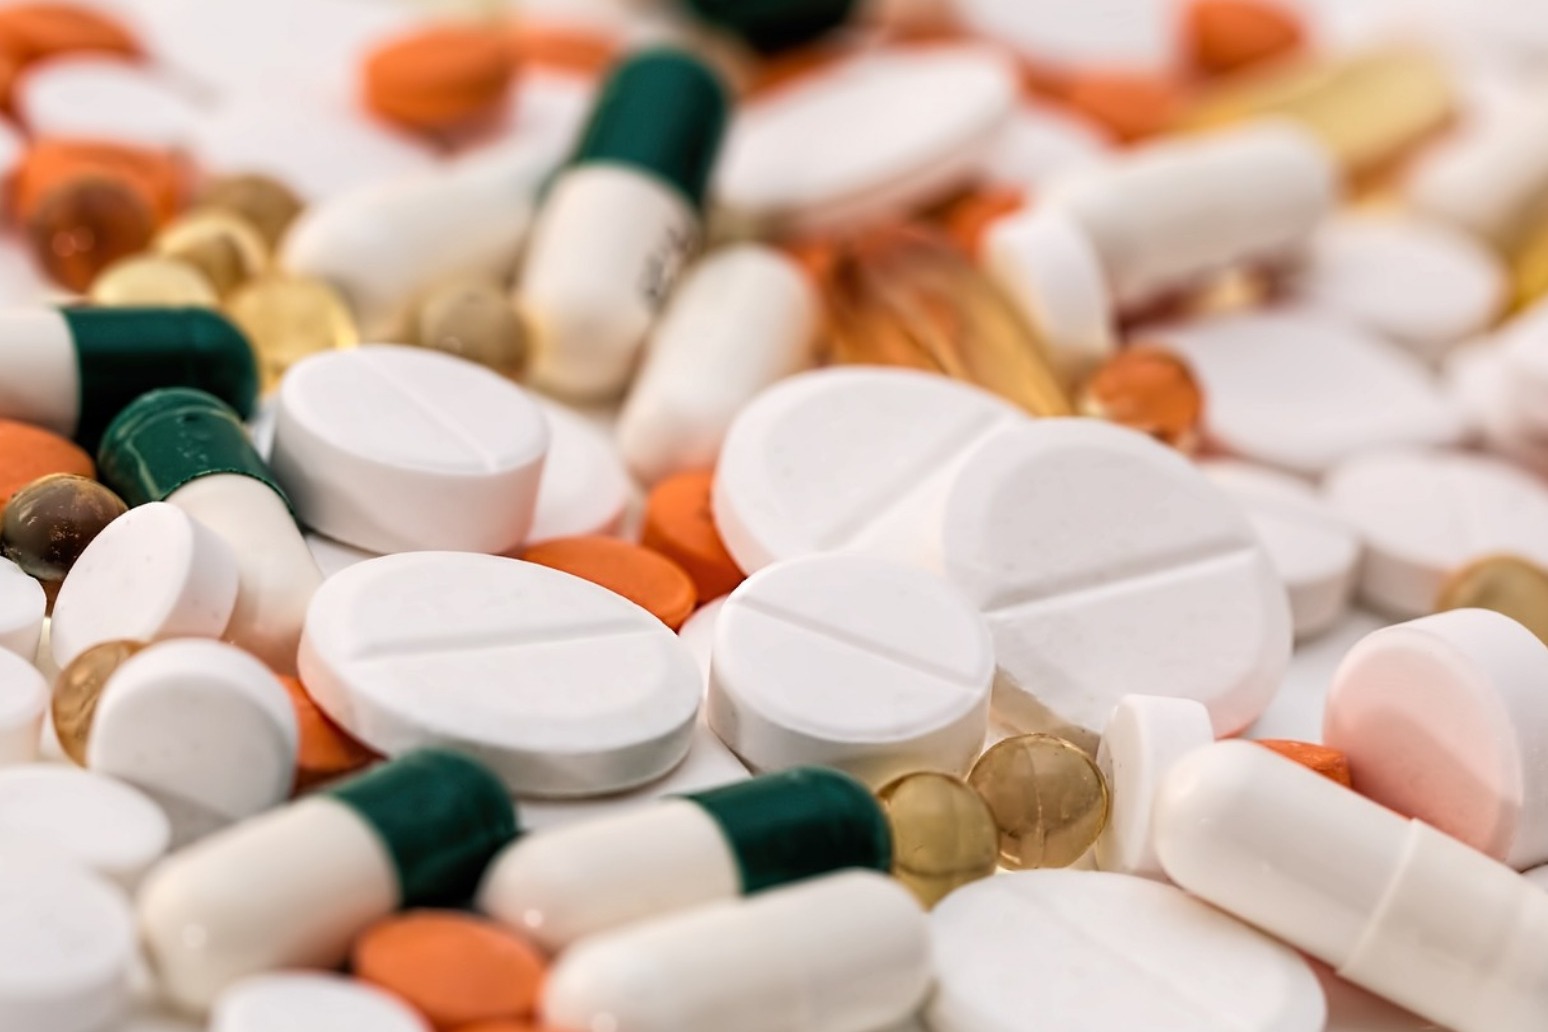 Government to outline plans to combat antibiotic resistance 